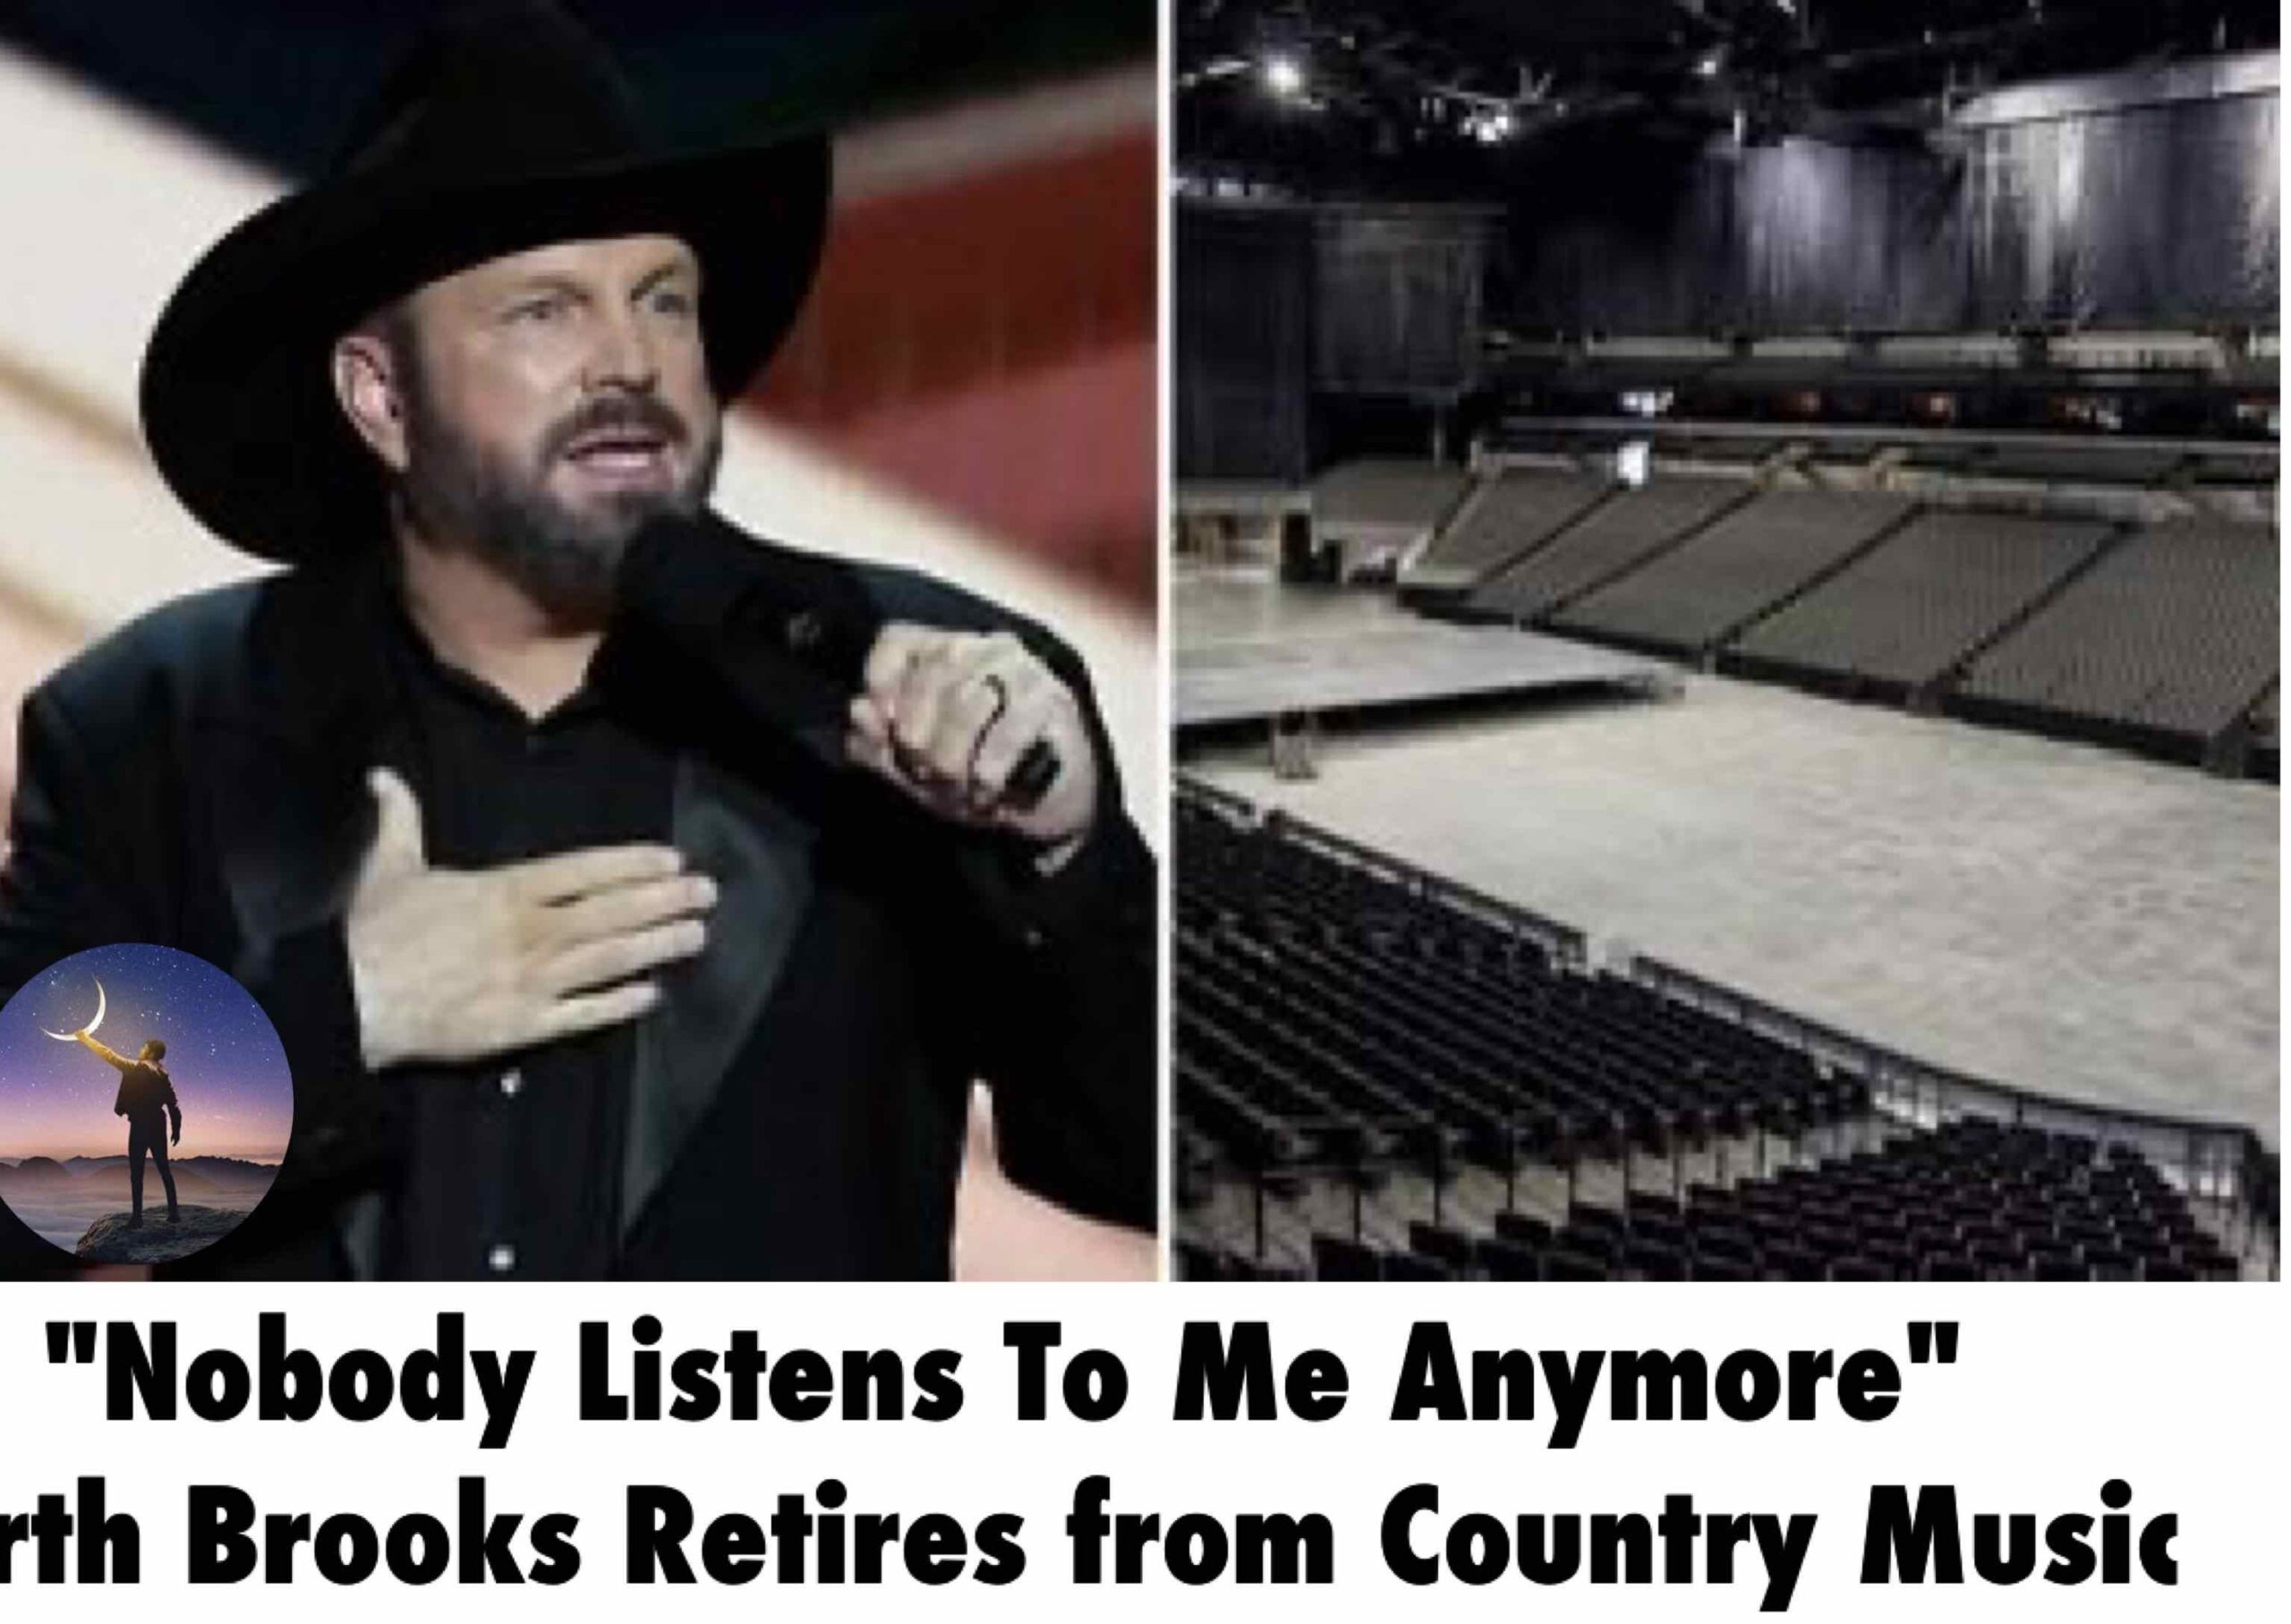 Breaking: Garth Brooks Quits Country Music: “Nobody Listens To Me Anymore